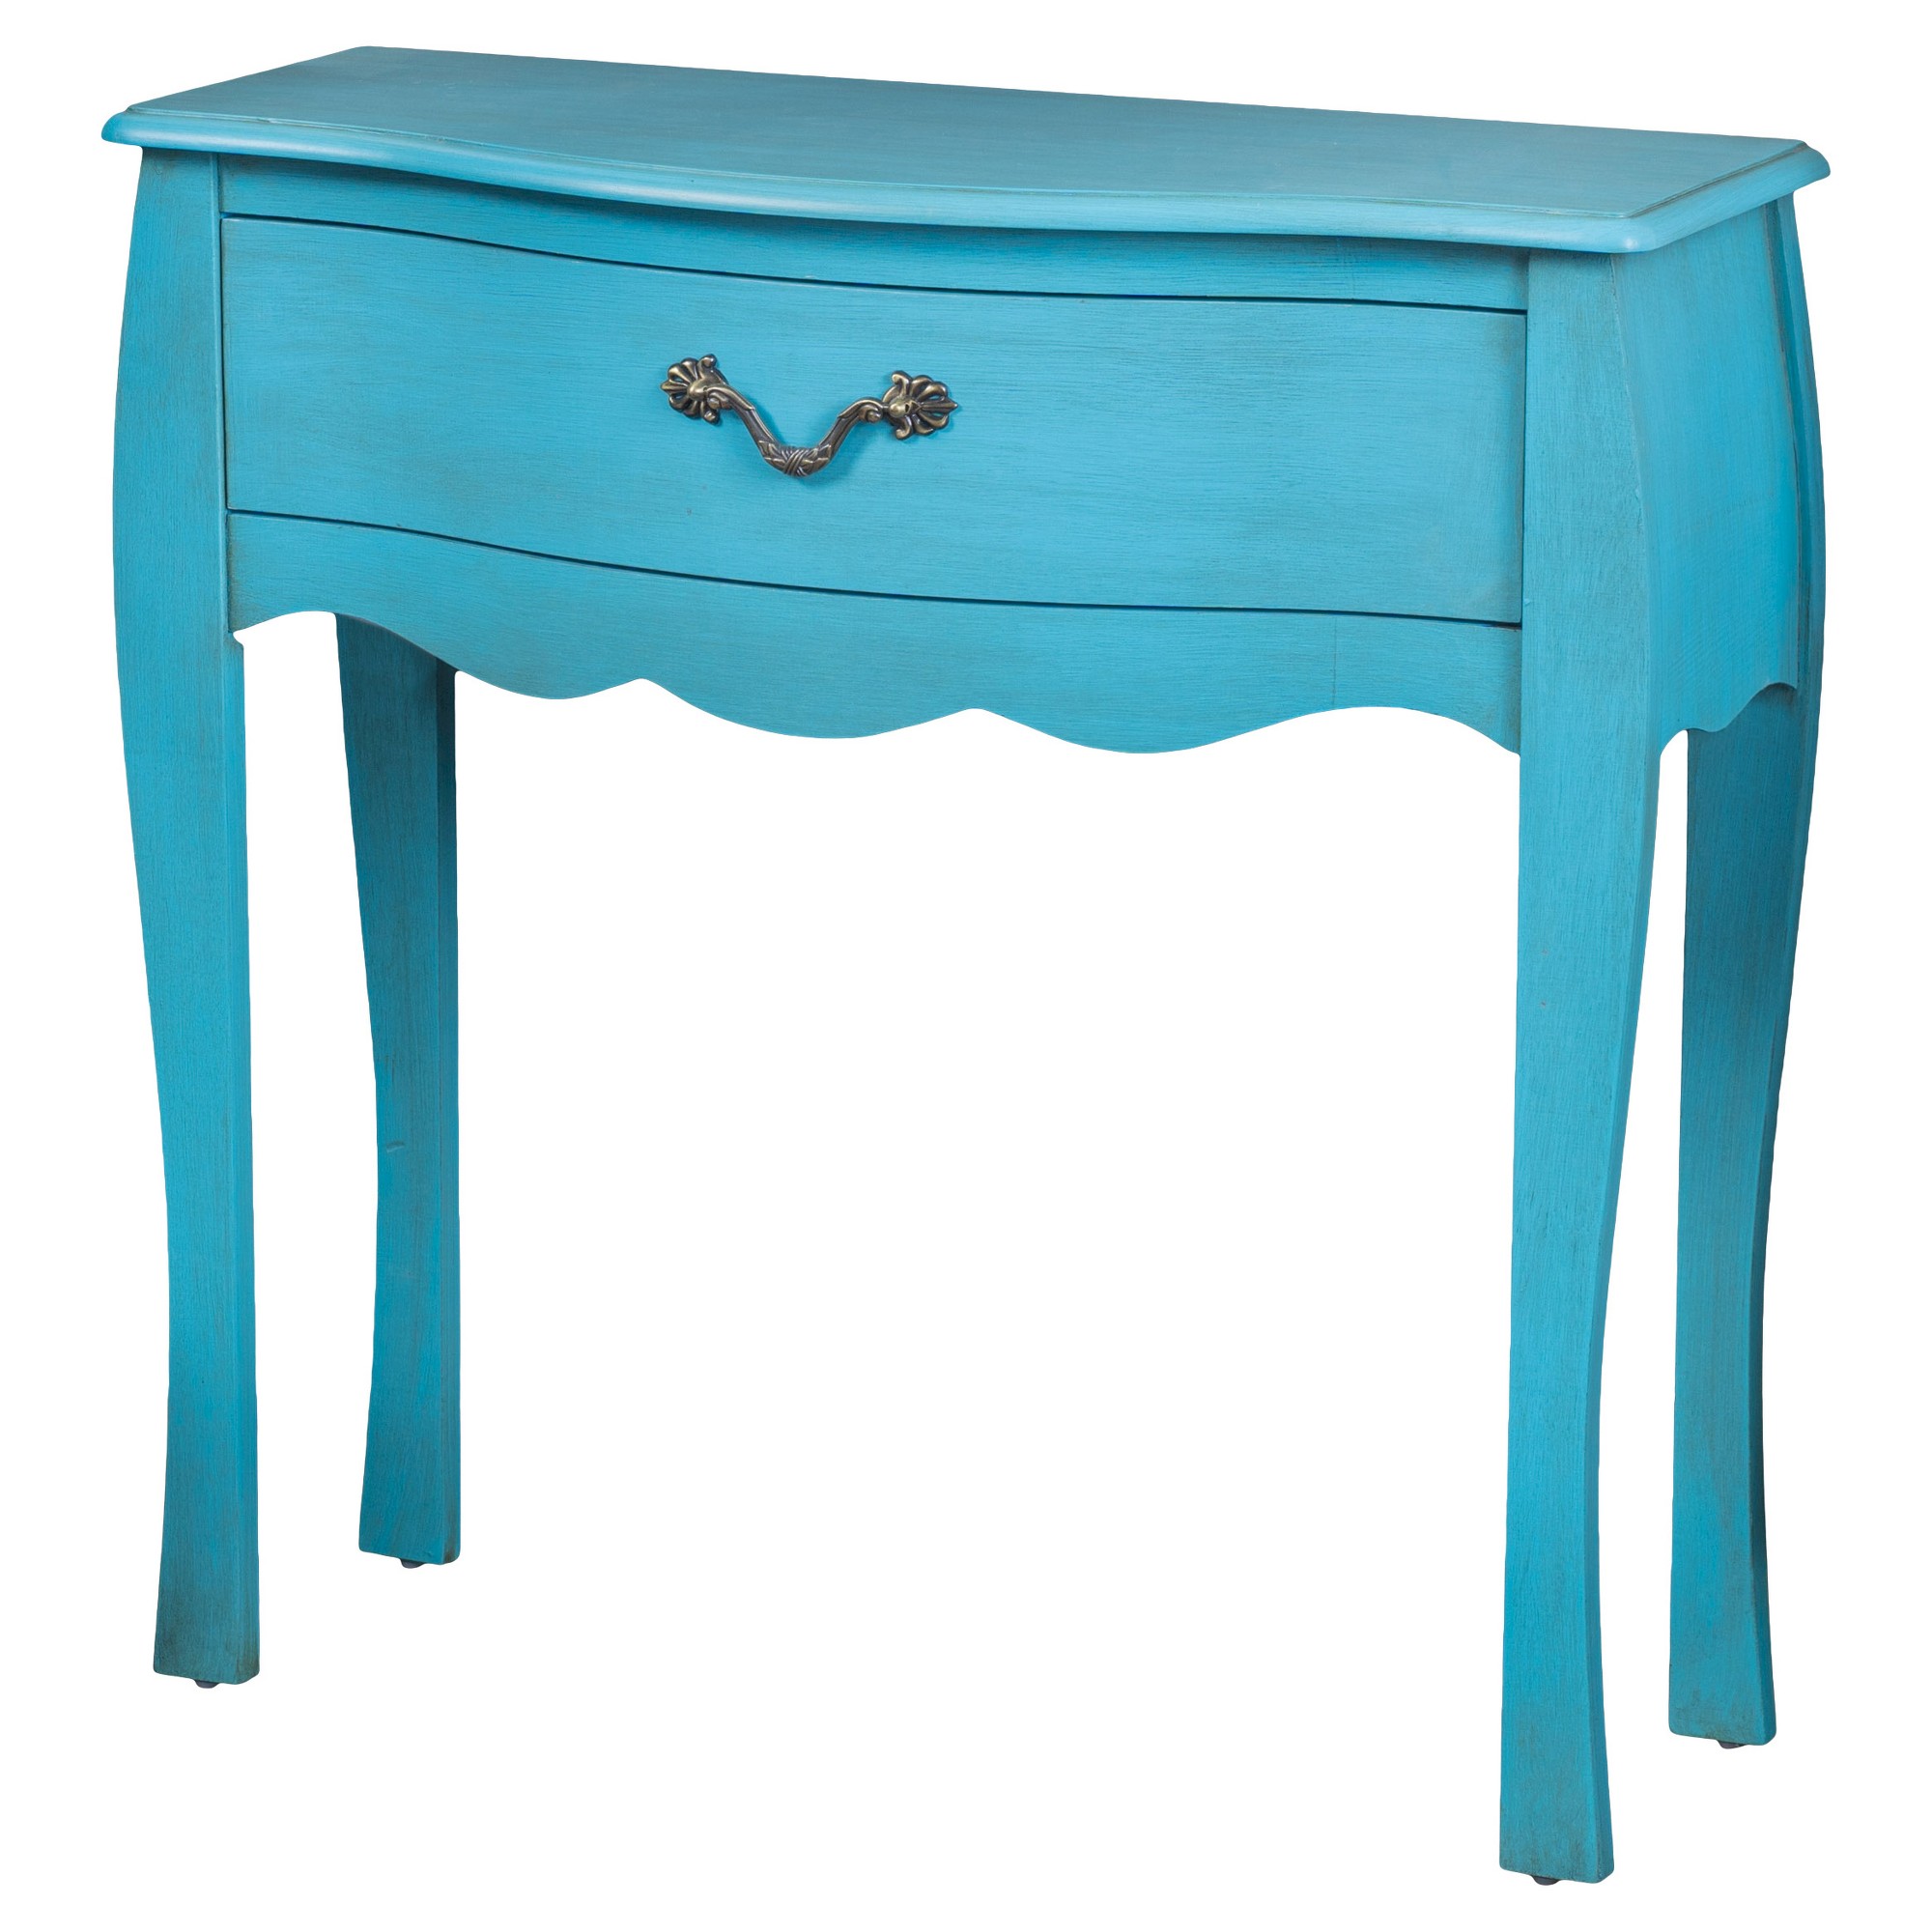 rainier console table blue christopher knight home products threshold fretwork accent teal wrought iron coffee legs target solid wood with drawers foyer mirror white porch battery